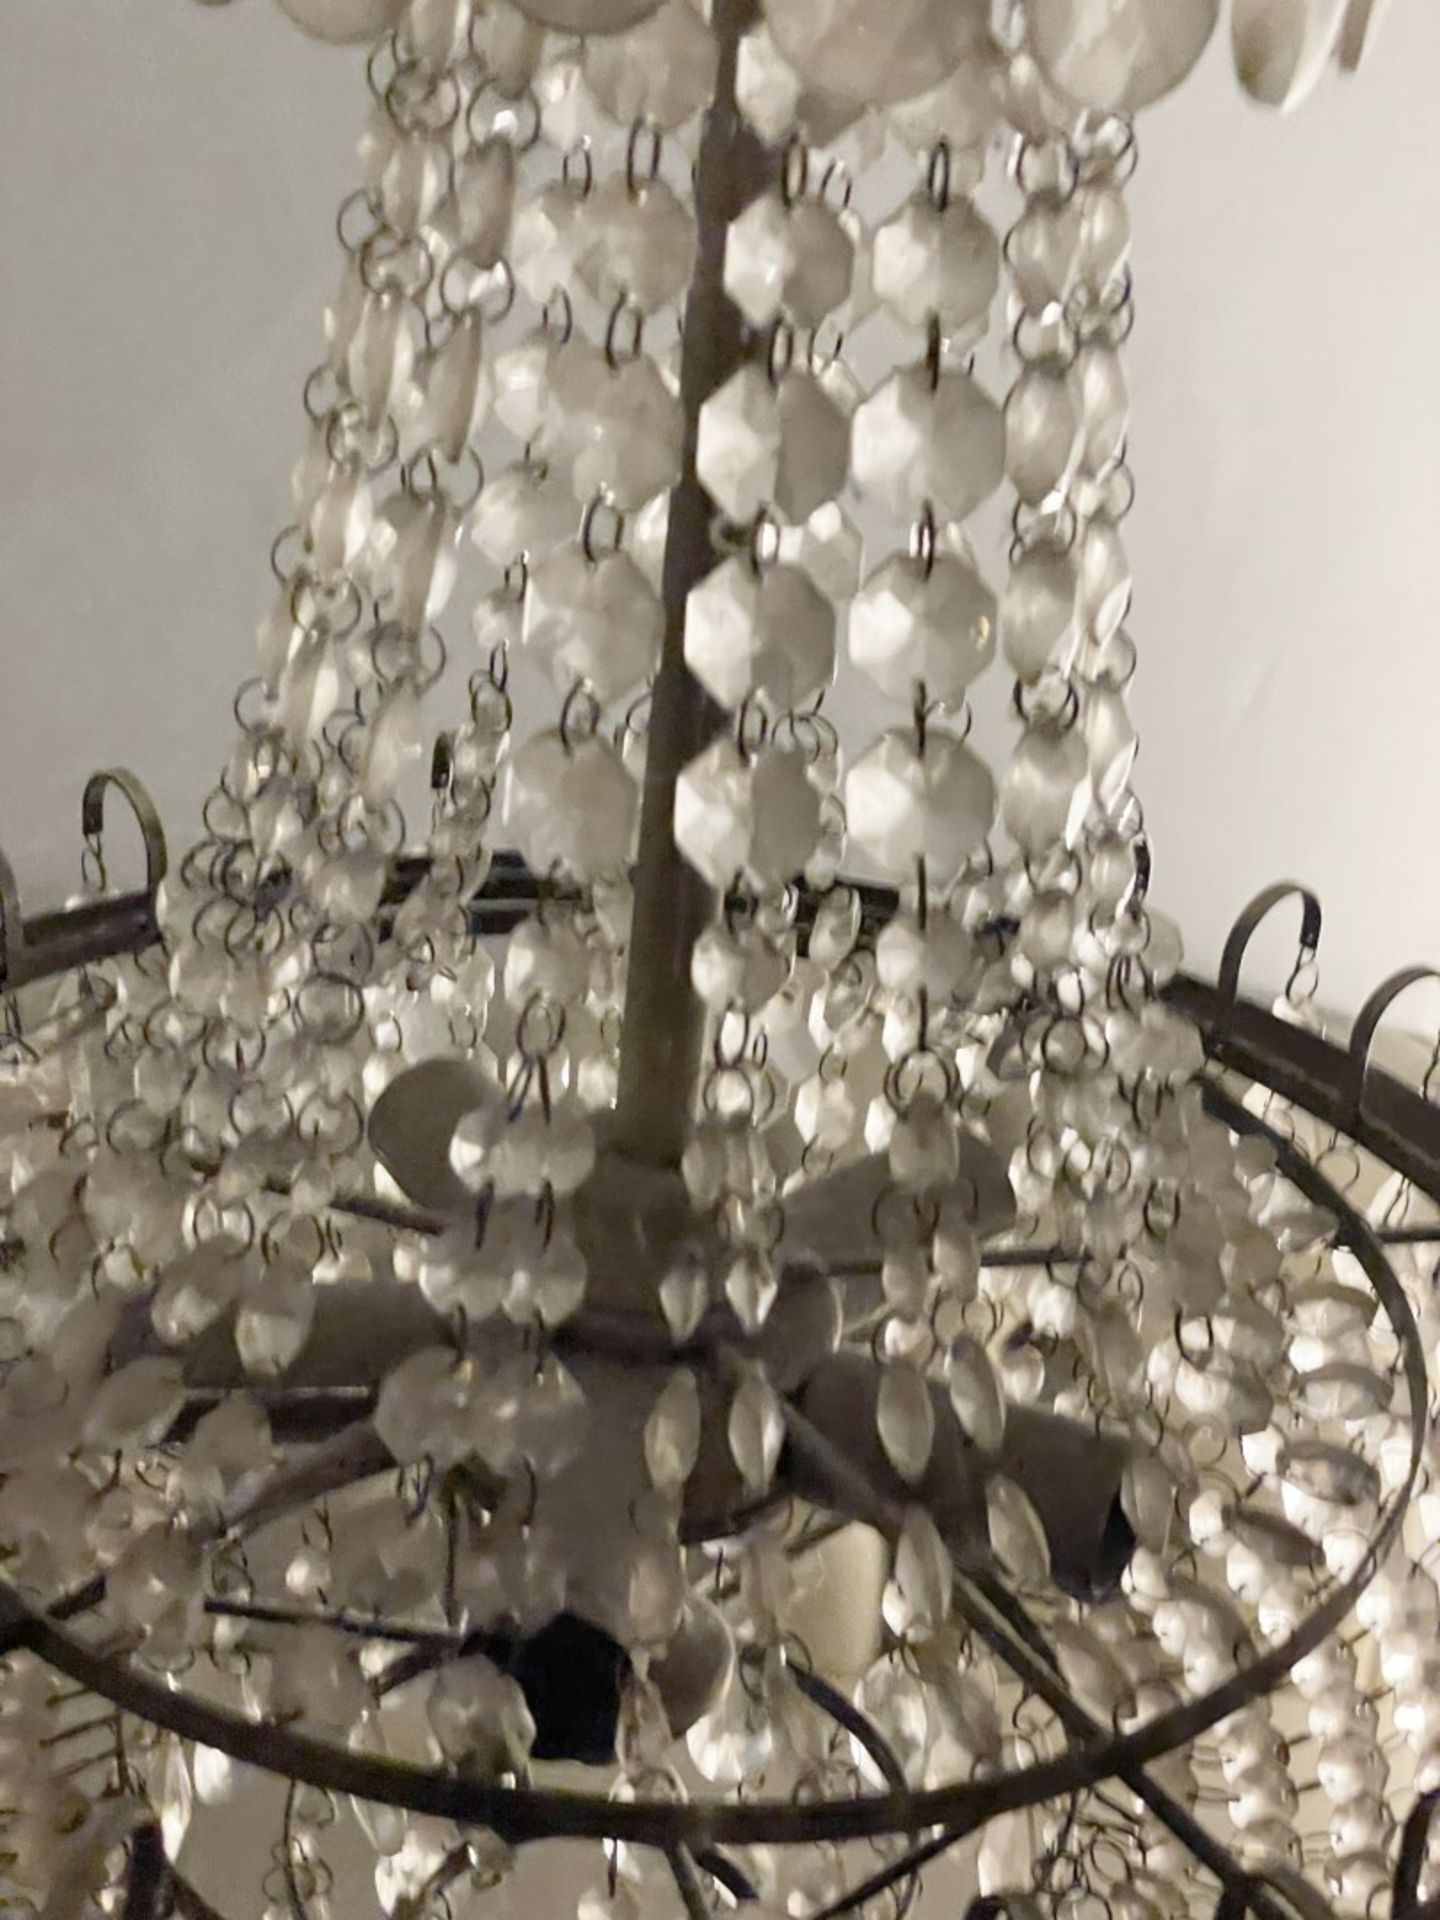 1 x Large Gustavian-style Chandelier Ceiling Pendant Light Adorned with Clear Droplets - Image 3 of 9